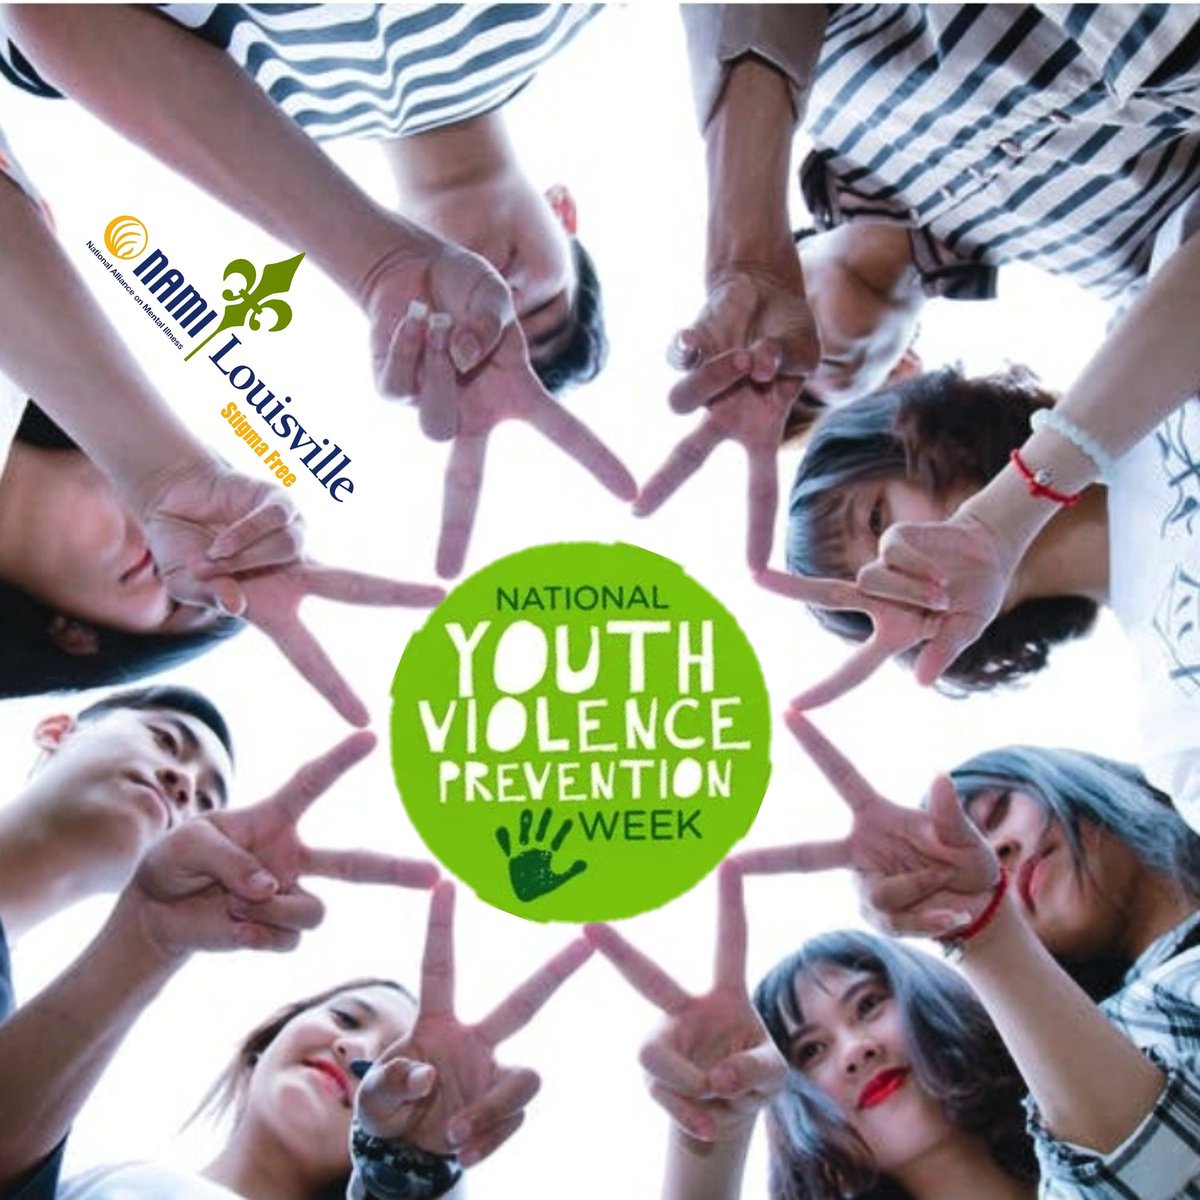 Tag us (@namilouisville) in your Peace Sign Selfies to show you choose  #PeaceOverViolence for National Youth Violence Prevention Week!

@safehealthylou @namiyouthlouisville @projecttechdrive & @sandyhookpromise @sandyhook @NATIONALSAVE

#NYVPW #LouYVPW #OSHN #Takeover #SHPYAB